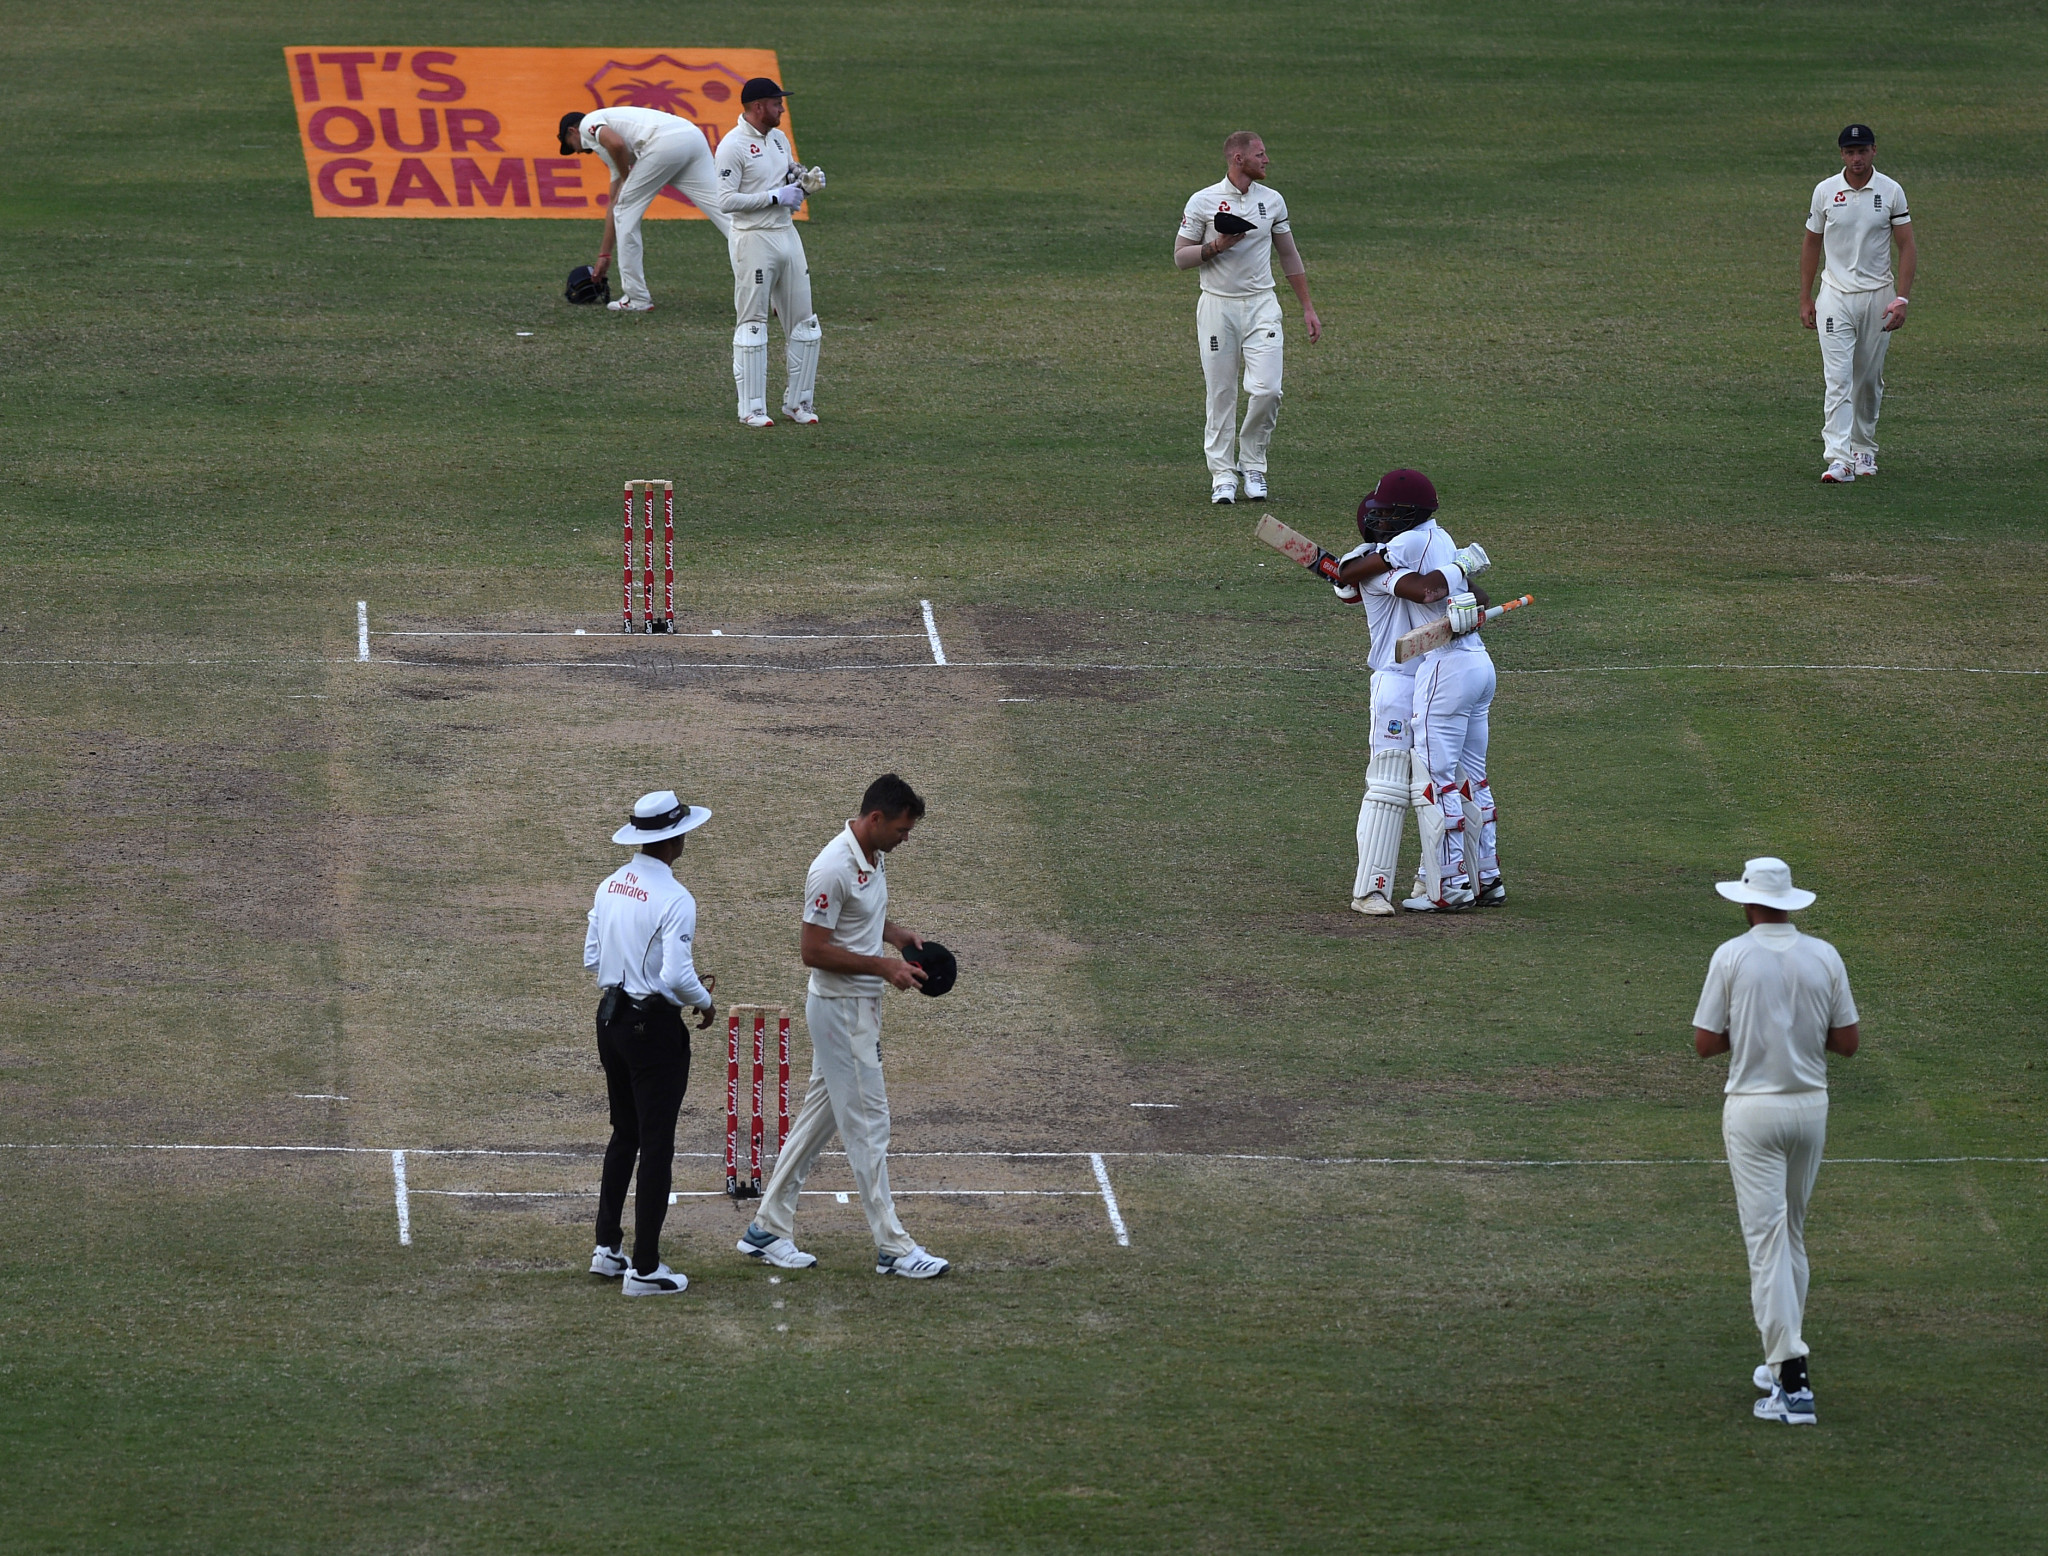 The pitch used for the second Test between the West Indies and England has been rated as "below average" ©Getty Images